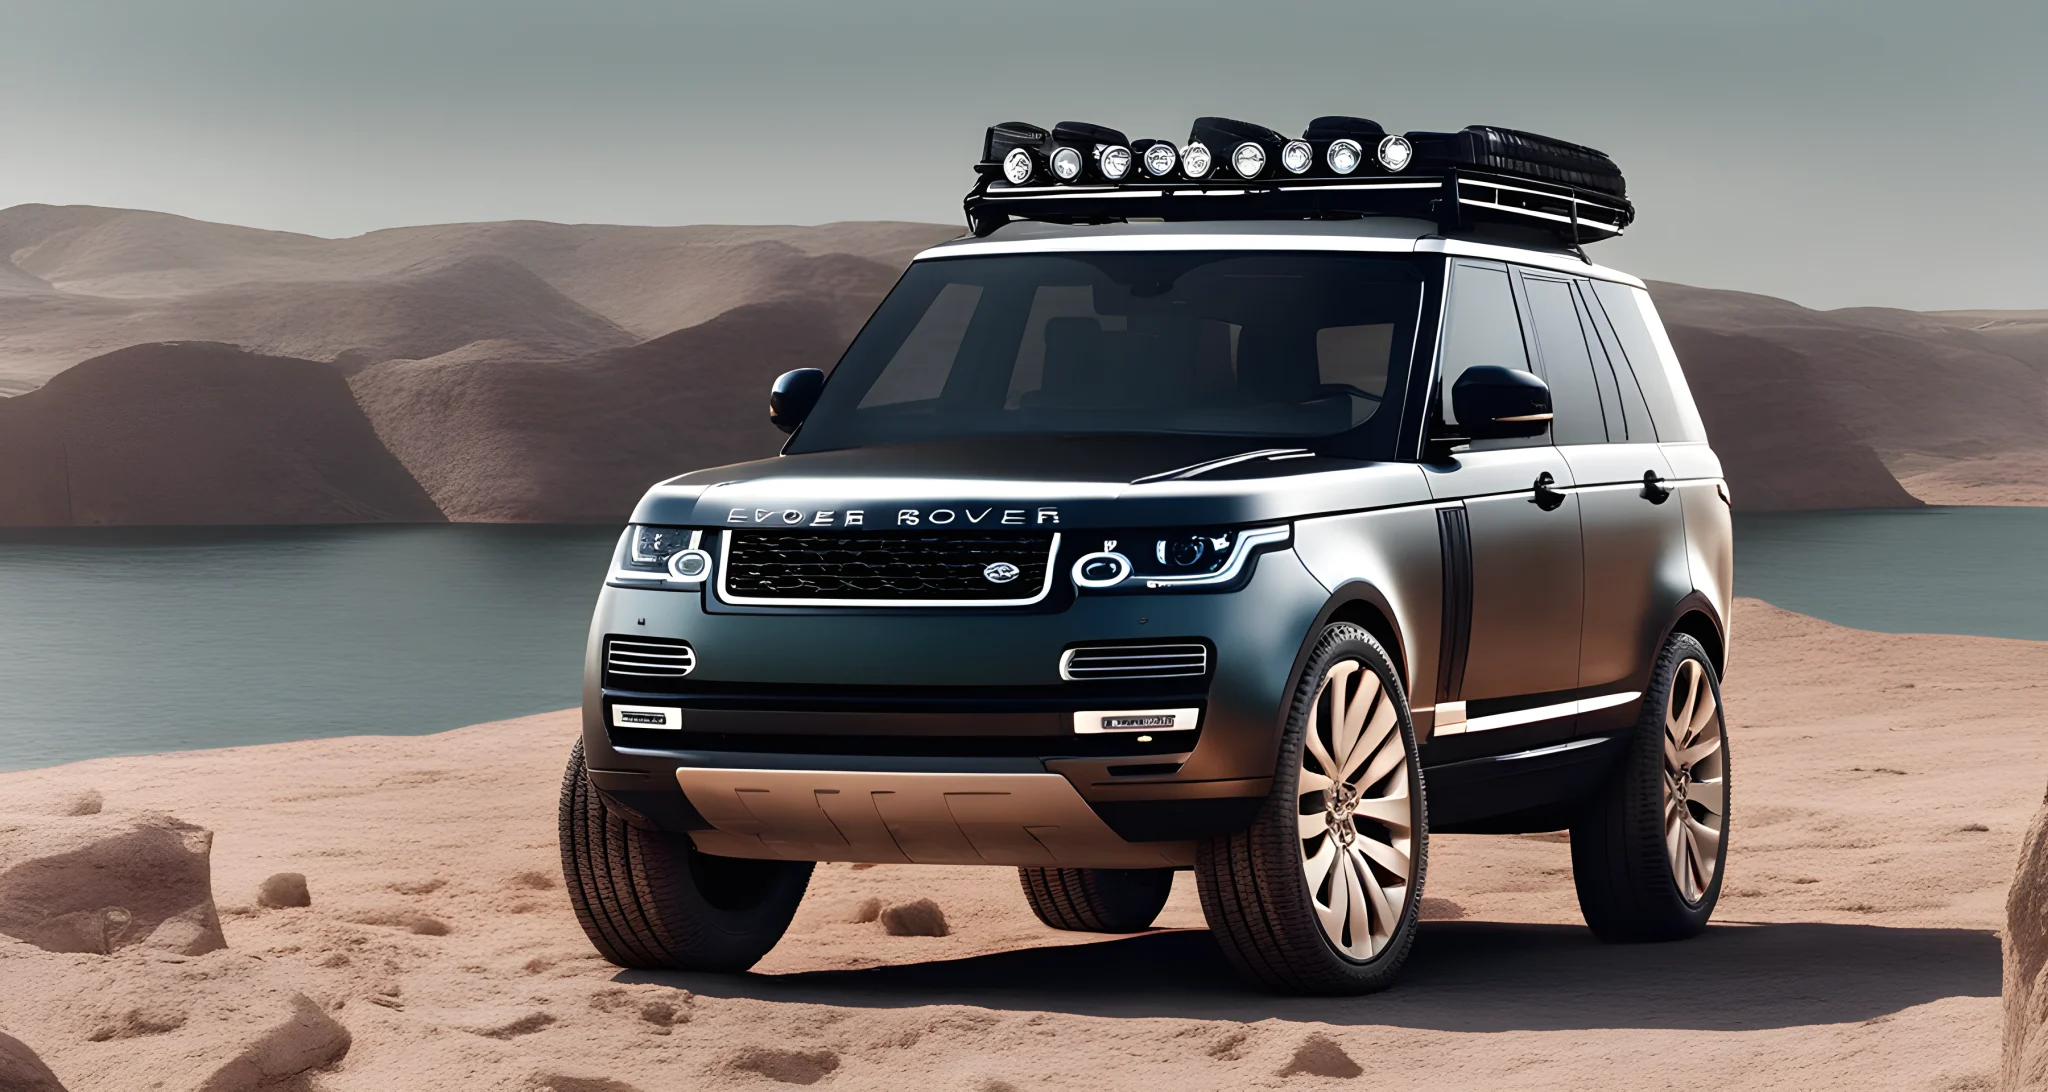 The image features a sleek and luxurious Land Rover vehicle, highlighting its advanced engineering and high-end design.